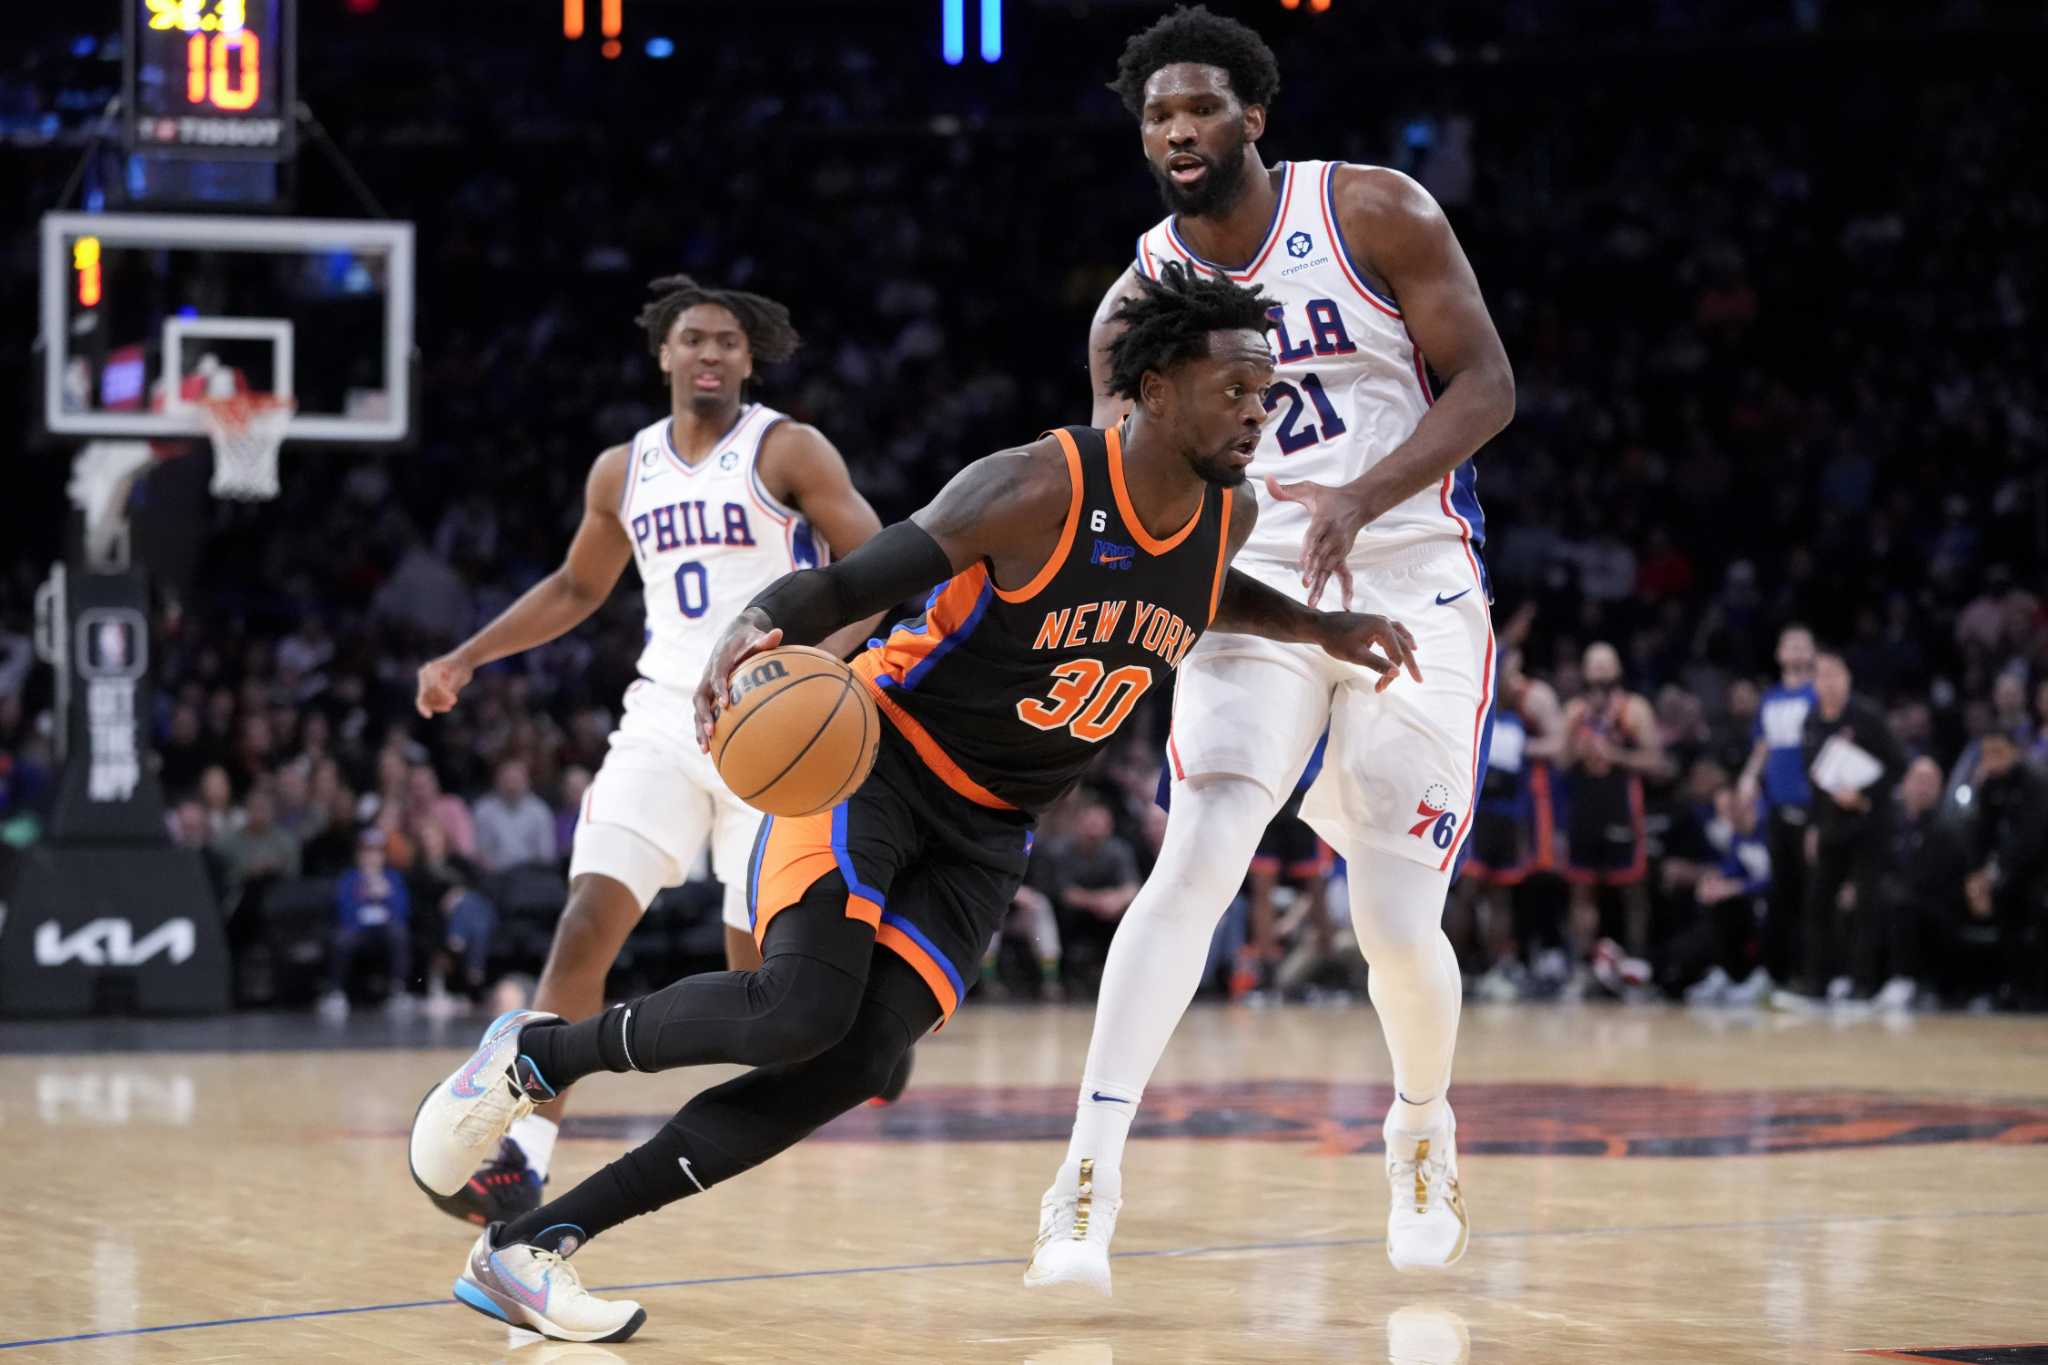 Nba Roundup Knicks Down By 21 Rally To Beat 76ers